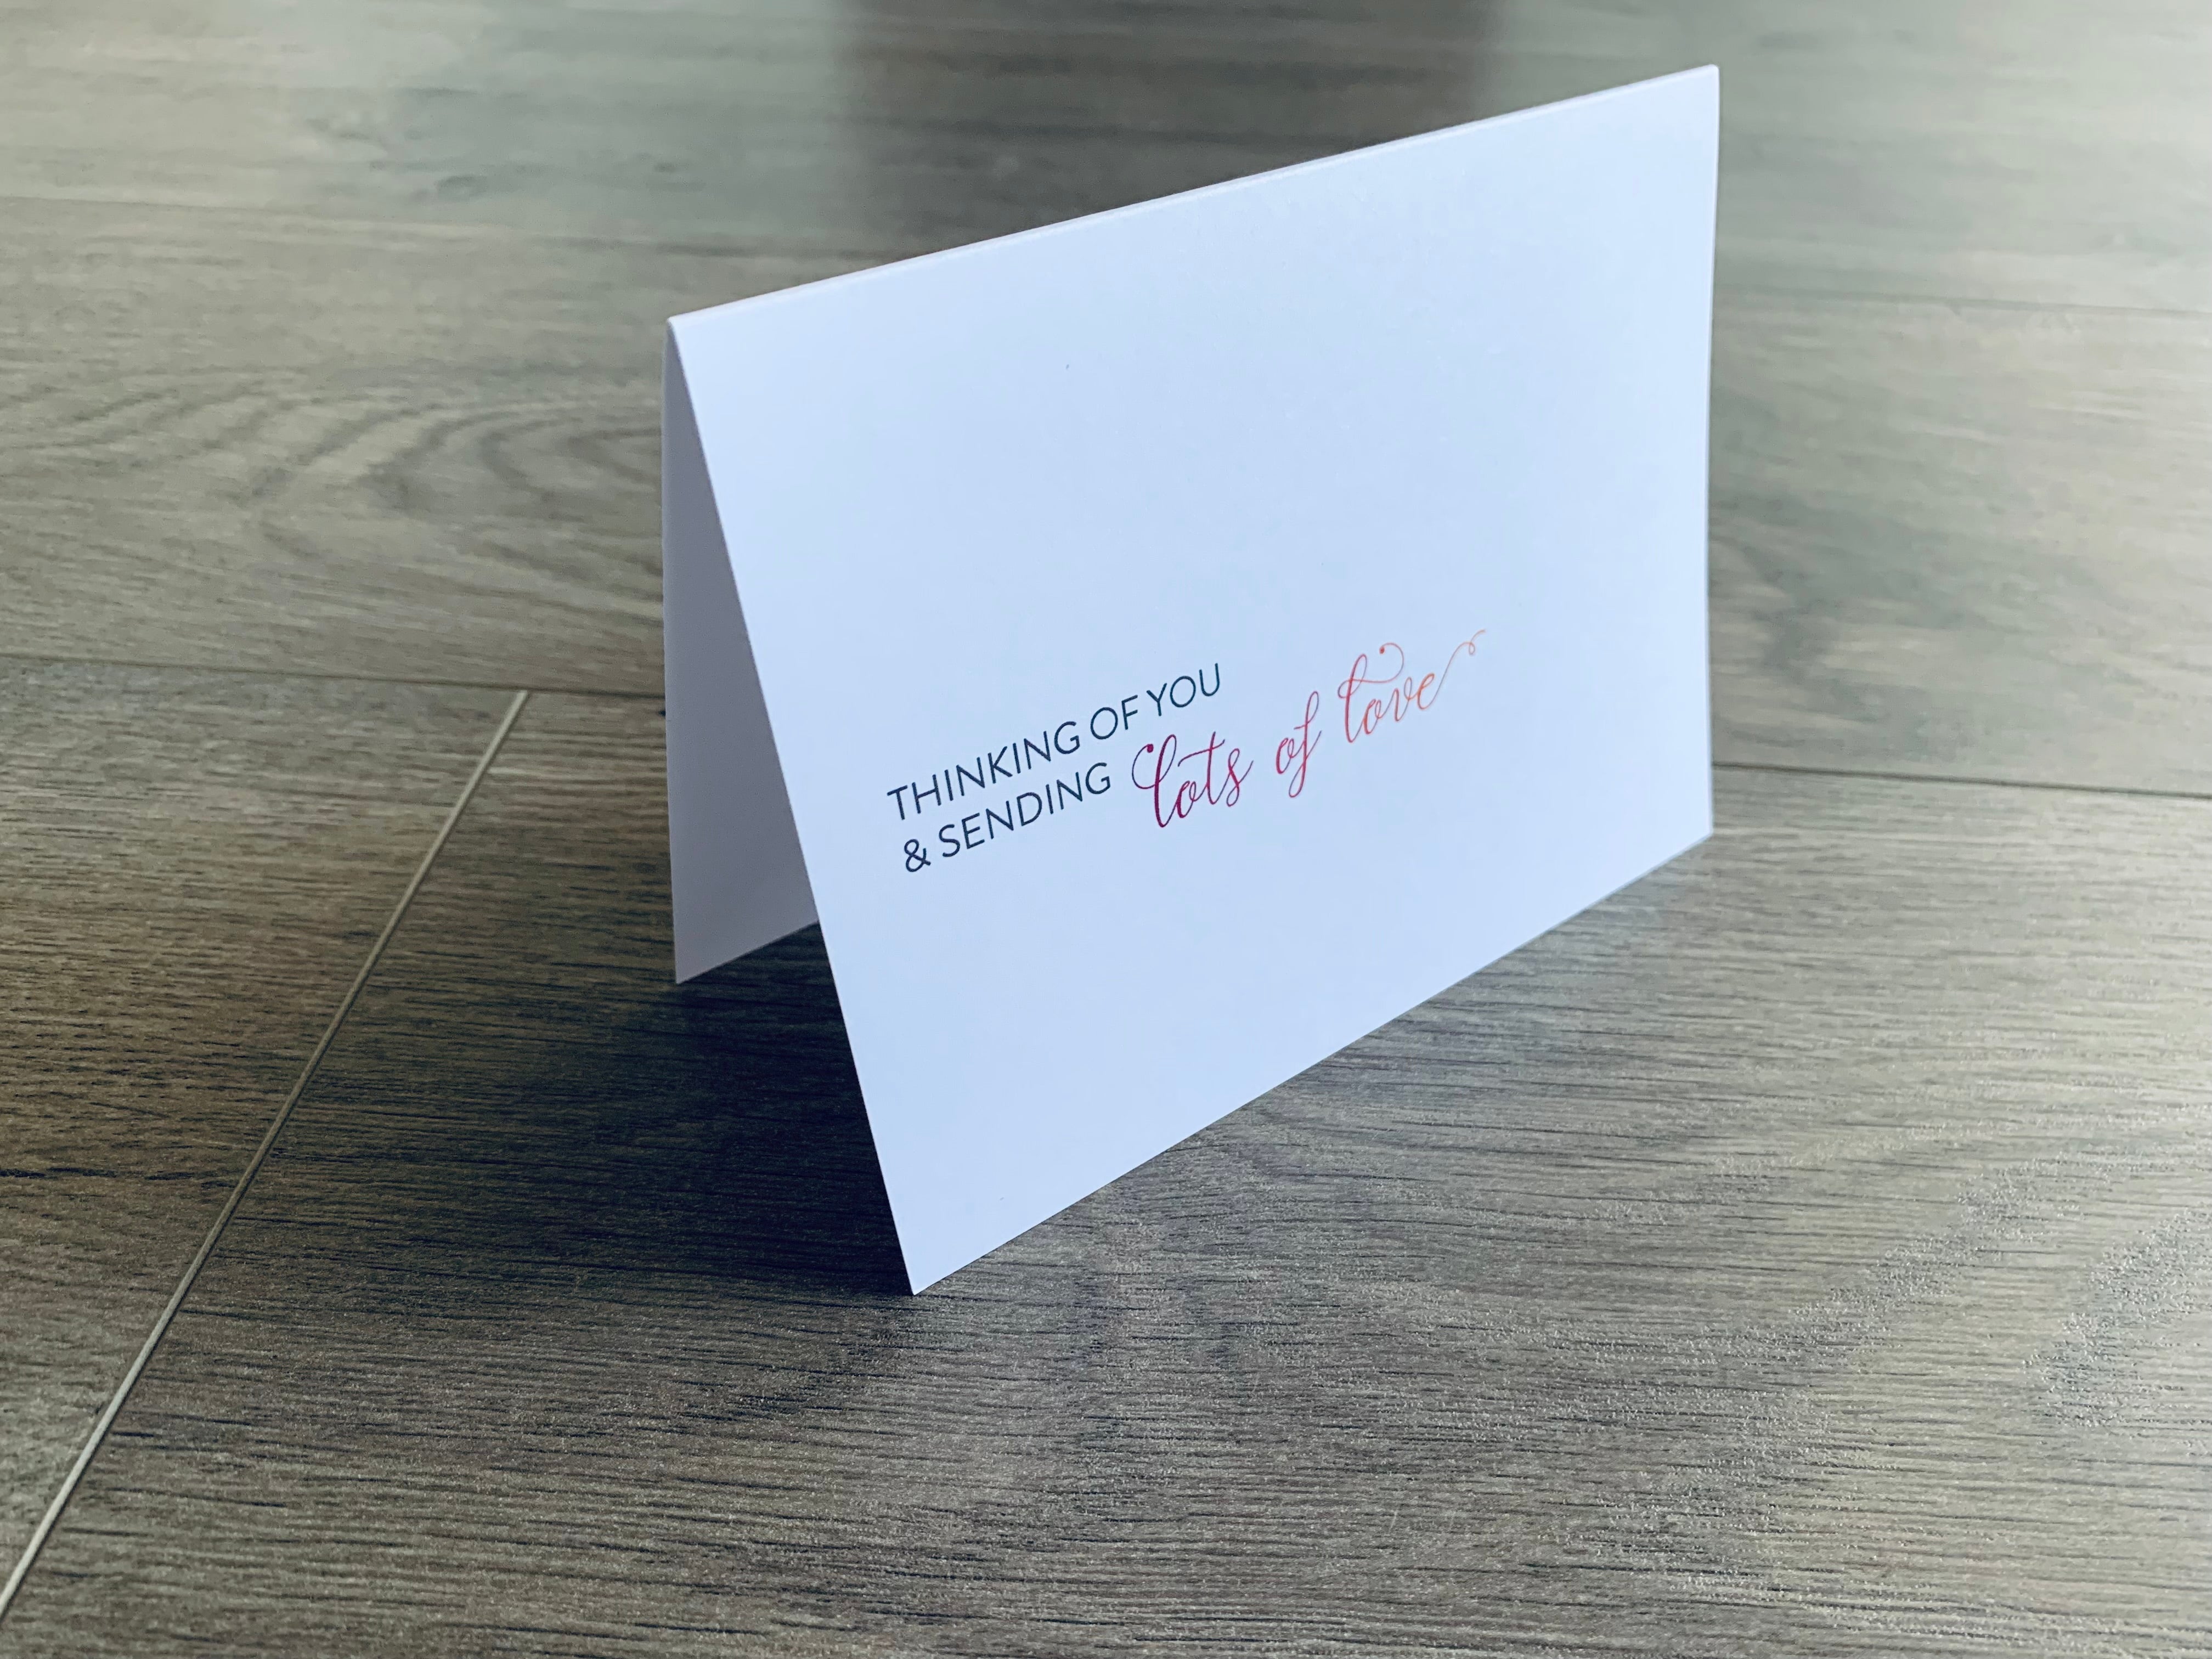 A white notecard is propped up on a gray wooden floor. The card reads, "Thinking of you and sending lots of love." Stationare's Thinking of You collection.